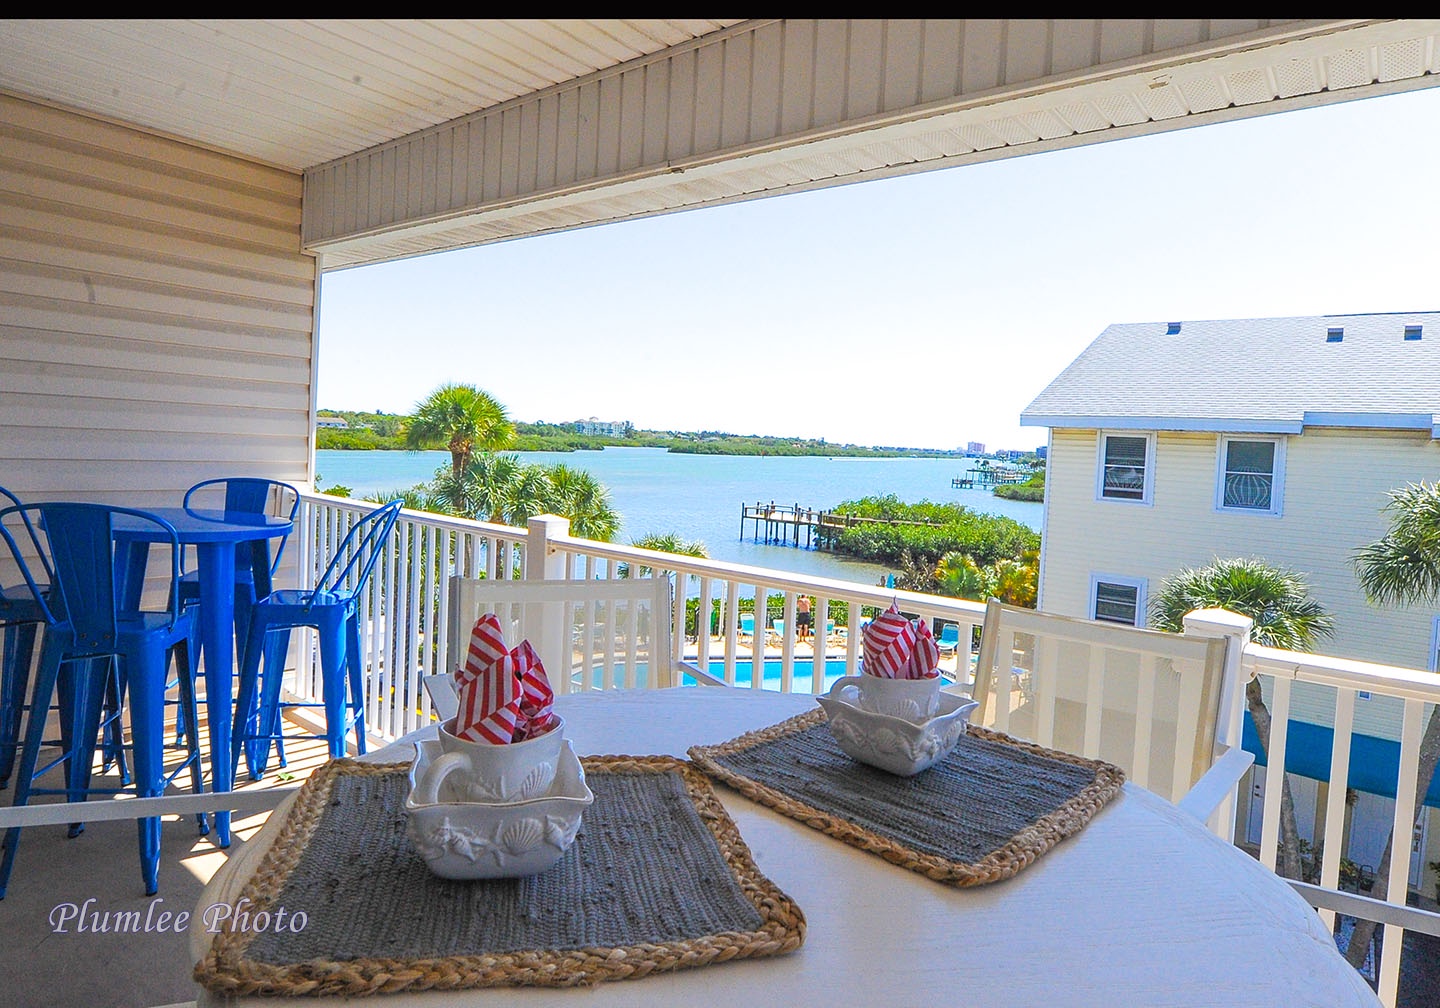 Spacious balcony with spectacular view of the Intracoastal Waterway.